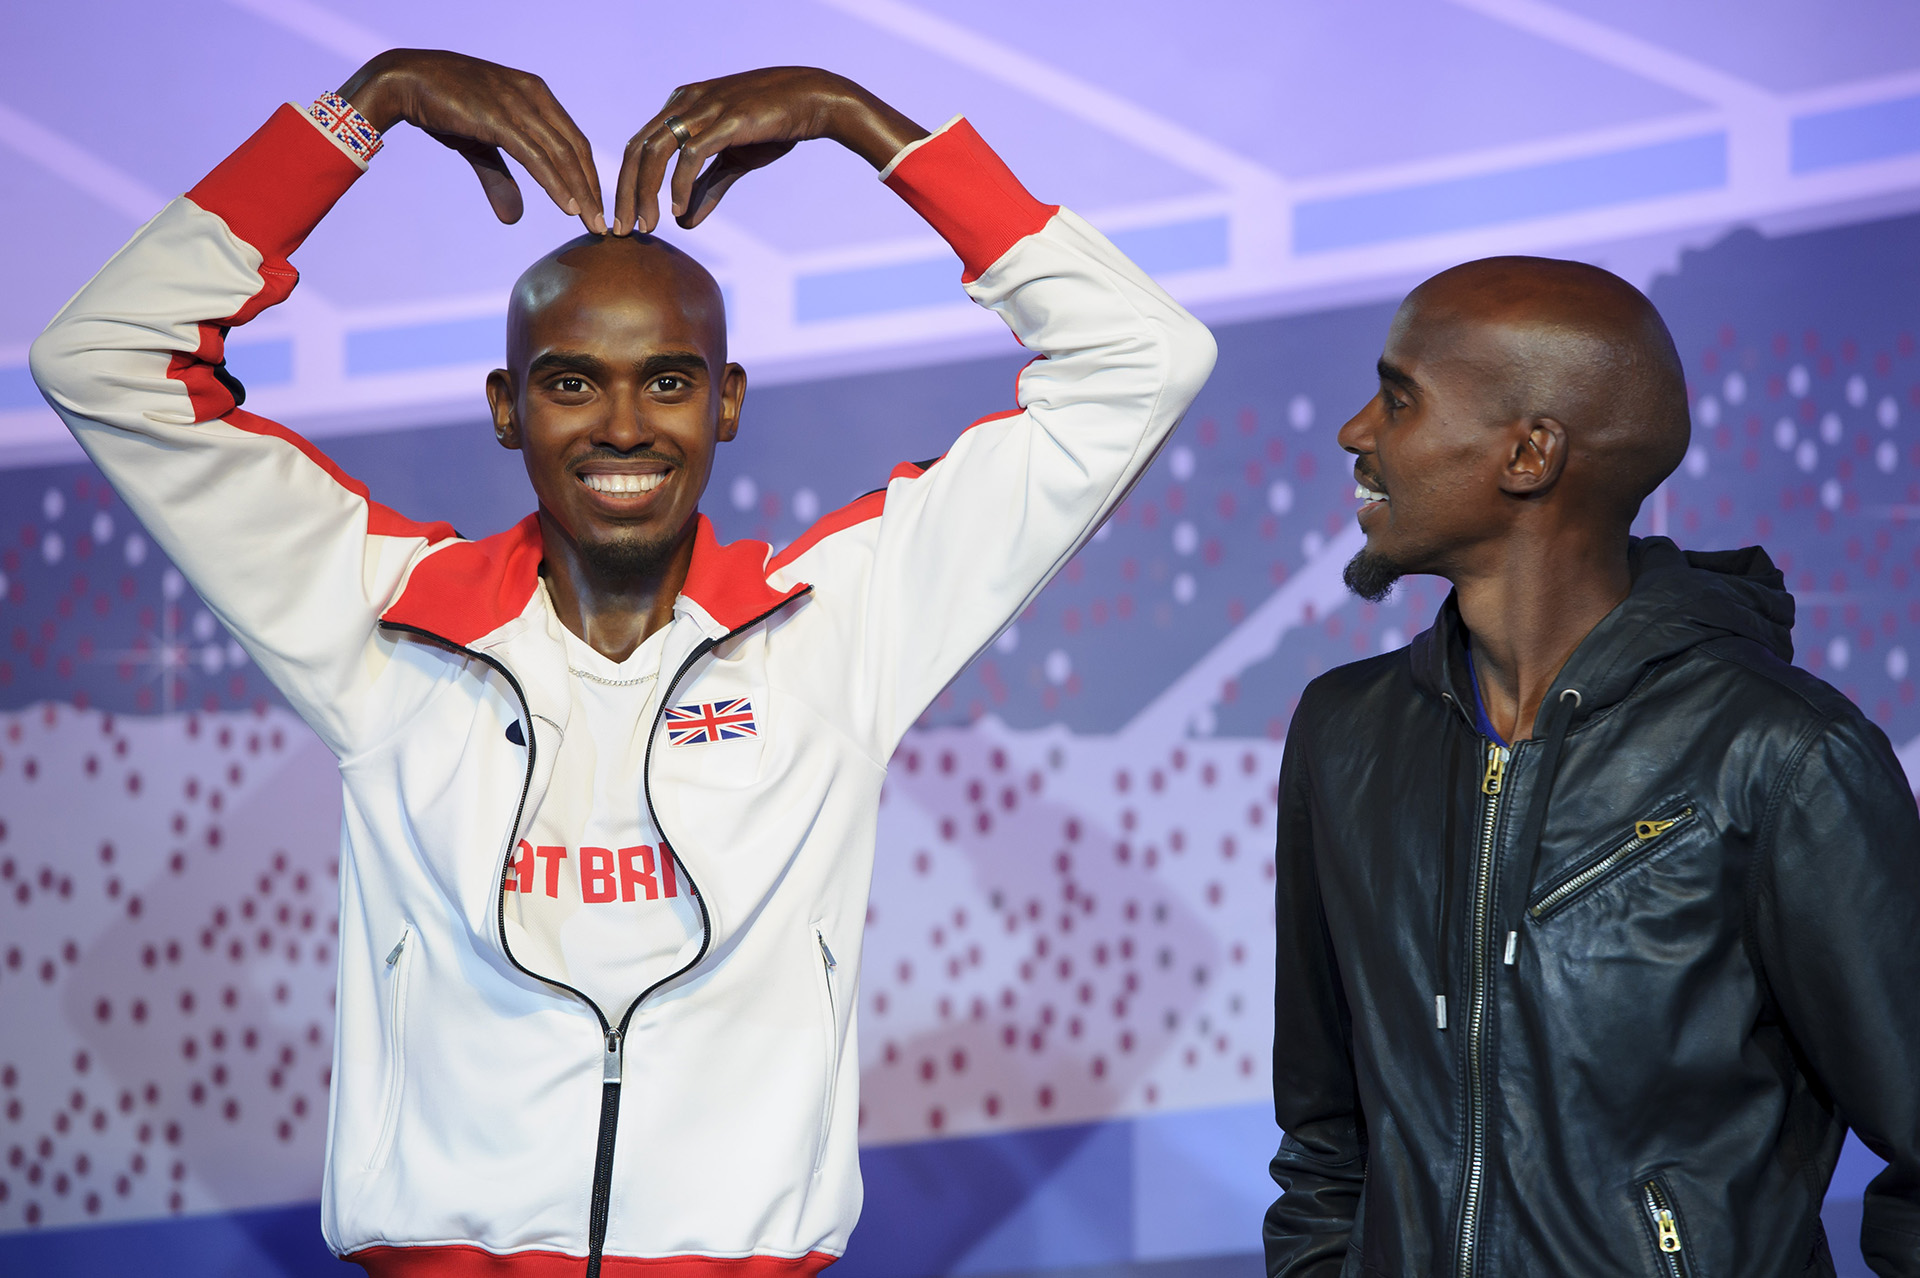 Mo Farah looking at his own figure at Madame Tussauds London